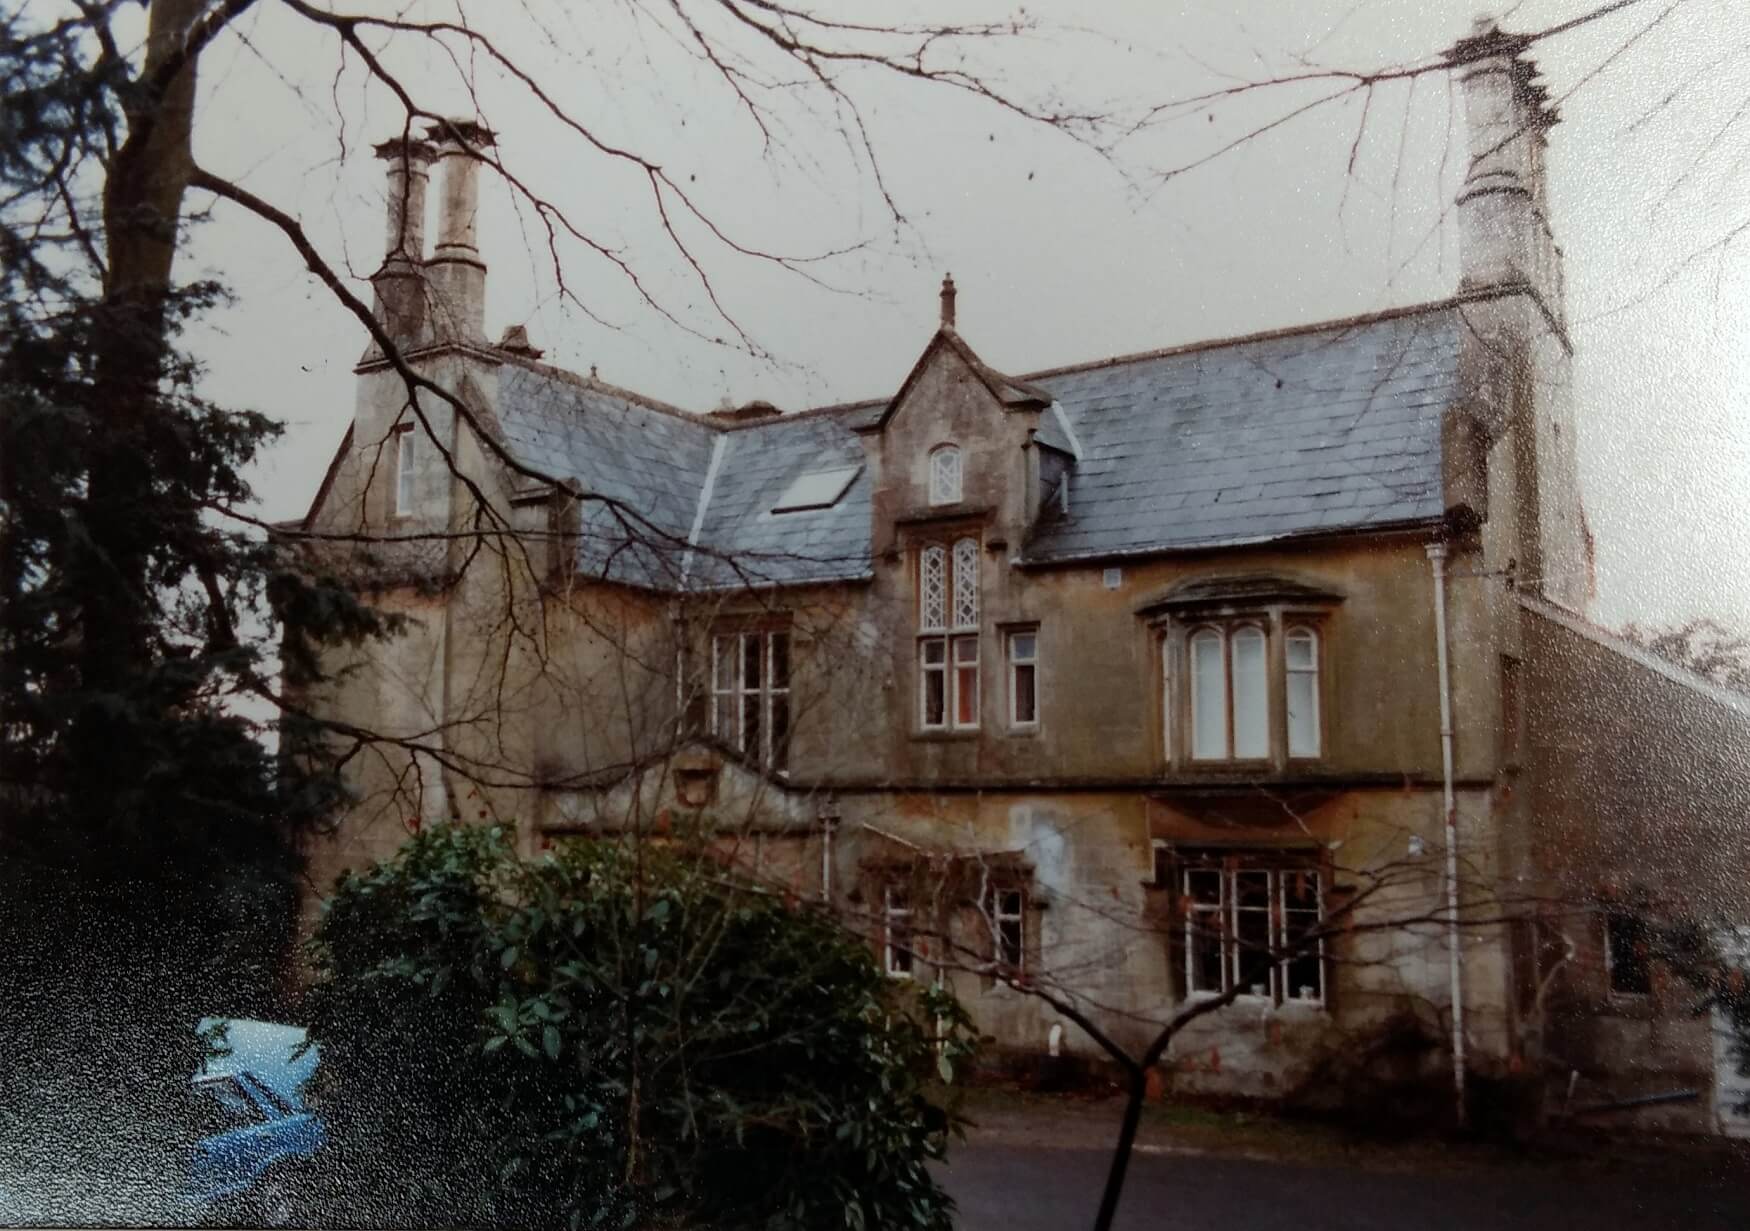 2 - BC8811229 Bath City Council Planning Department. Conservation Grant file for The Old Vicarage, Church Road, Combe Down, 15 Feb 1983-13 Sep 1983